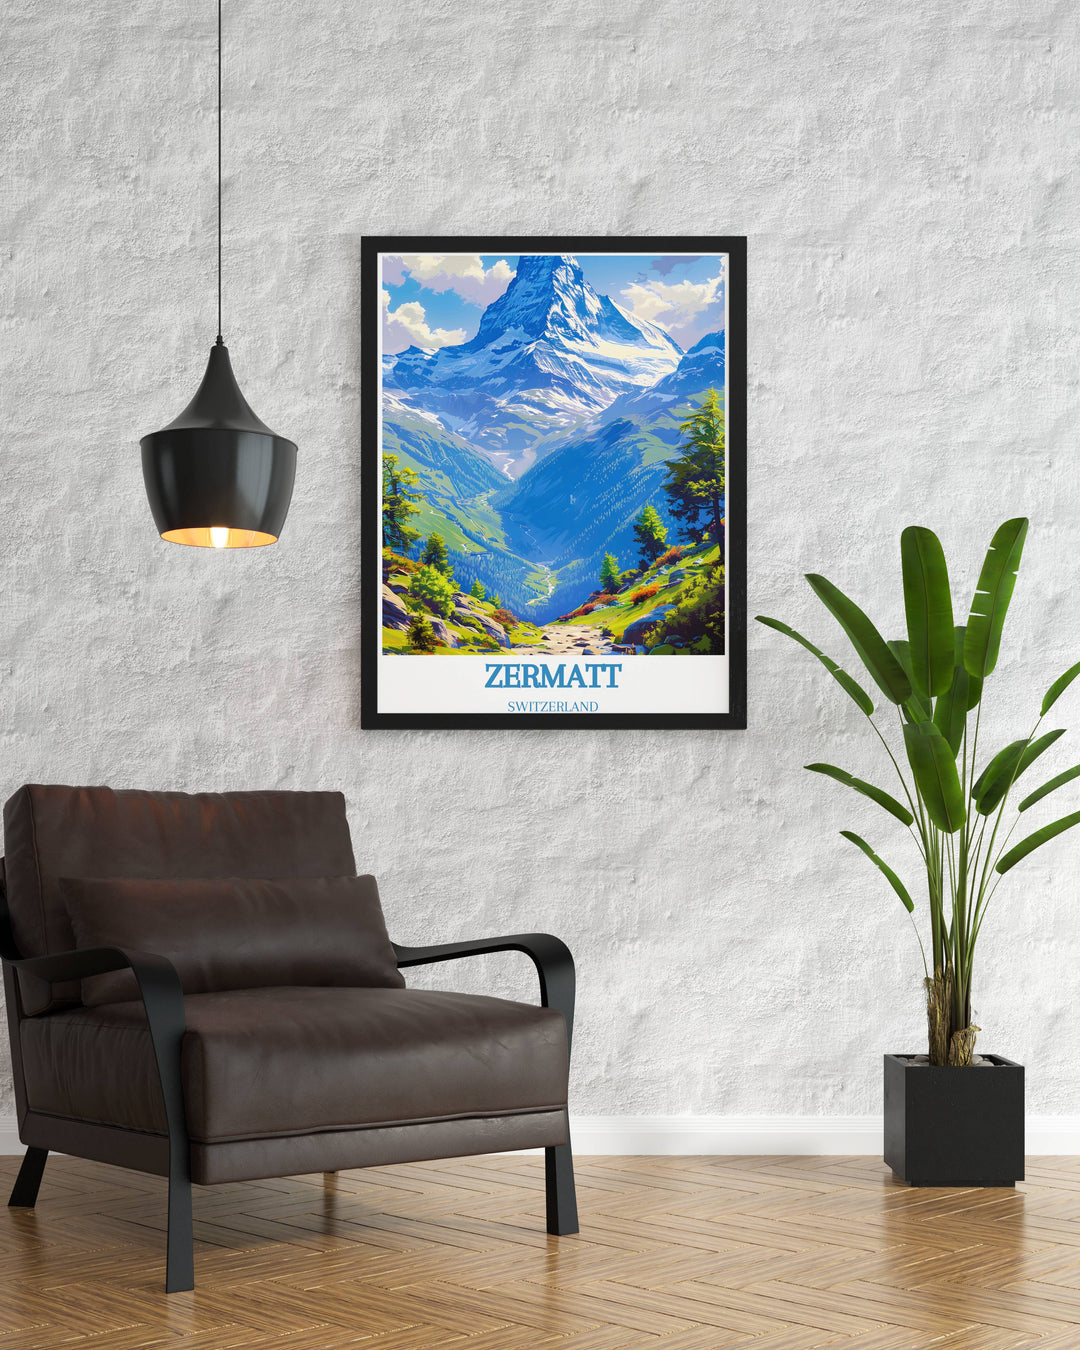 Stunning modern poster of Zermatt Ski Resort, portraying the iconic Matterhorn and its surrounding landscapes, perfect for creating a sleek and sophisticated decor.